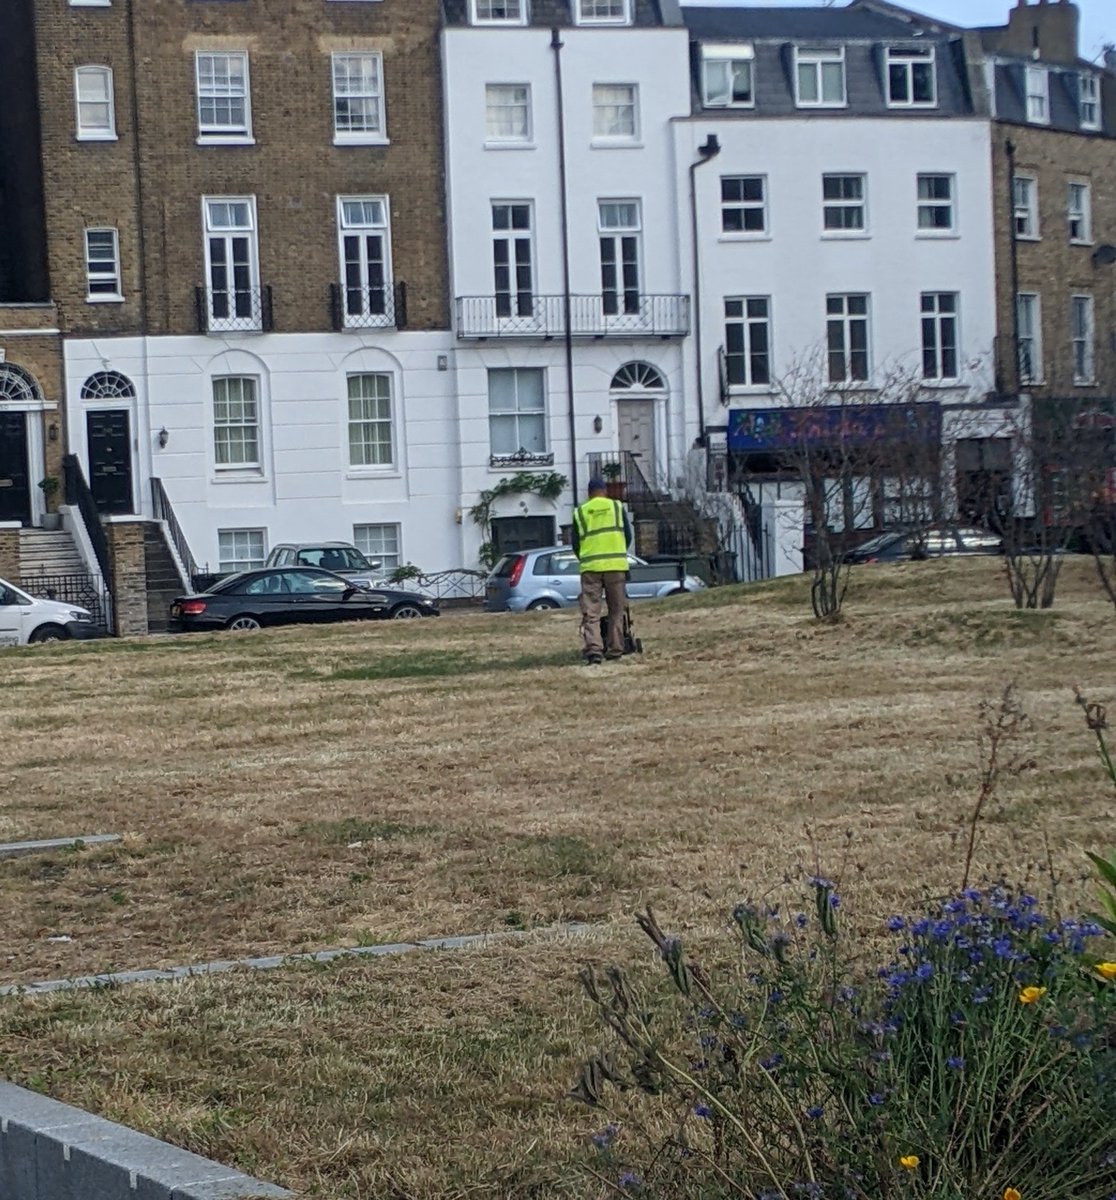 The grass is practically dust in this weather, best mow whatever tiny bits of green may be struggling on!! 

Best use petrol engine equipment too!! 

AND in #InsectWeek23 so best destroy some habitat

@lambeth_council not good enough in a climate AND biodiversity crisis